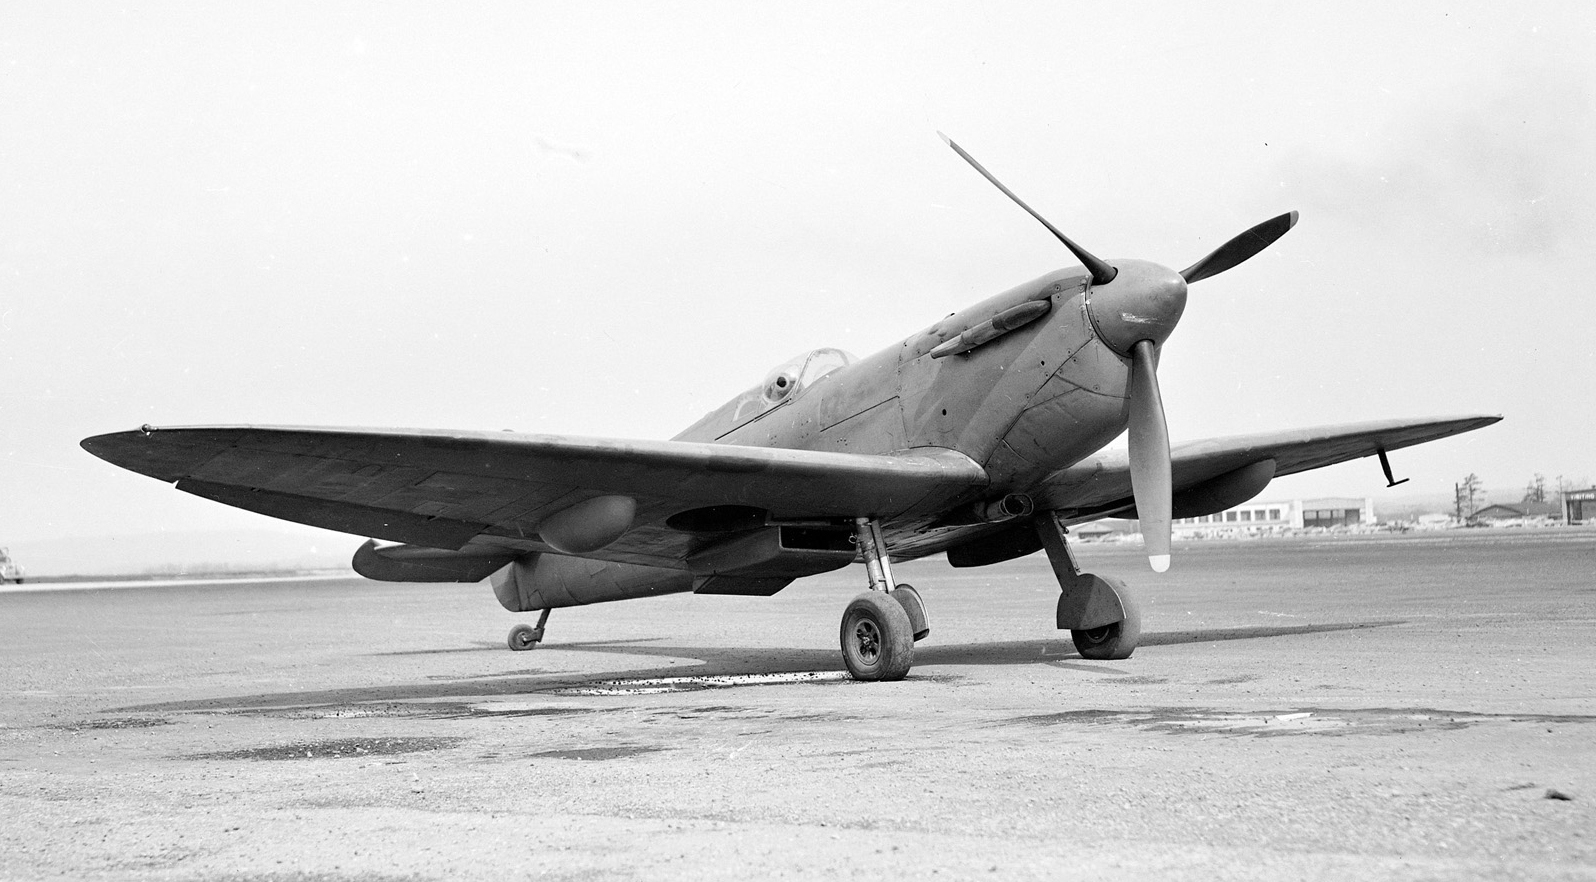 A Spitfire on ground on May 22, 1943. PHOTO: DND Archives, PL-16608 